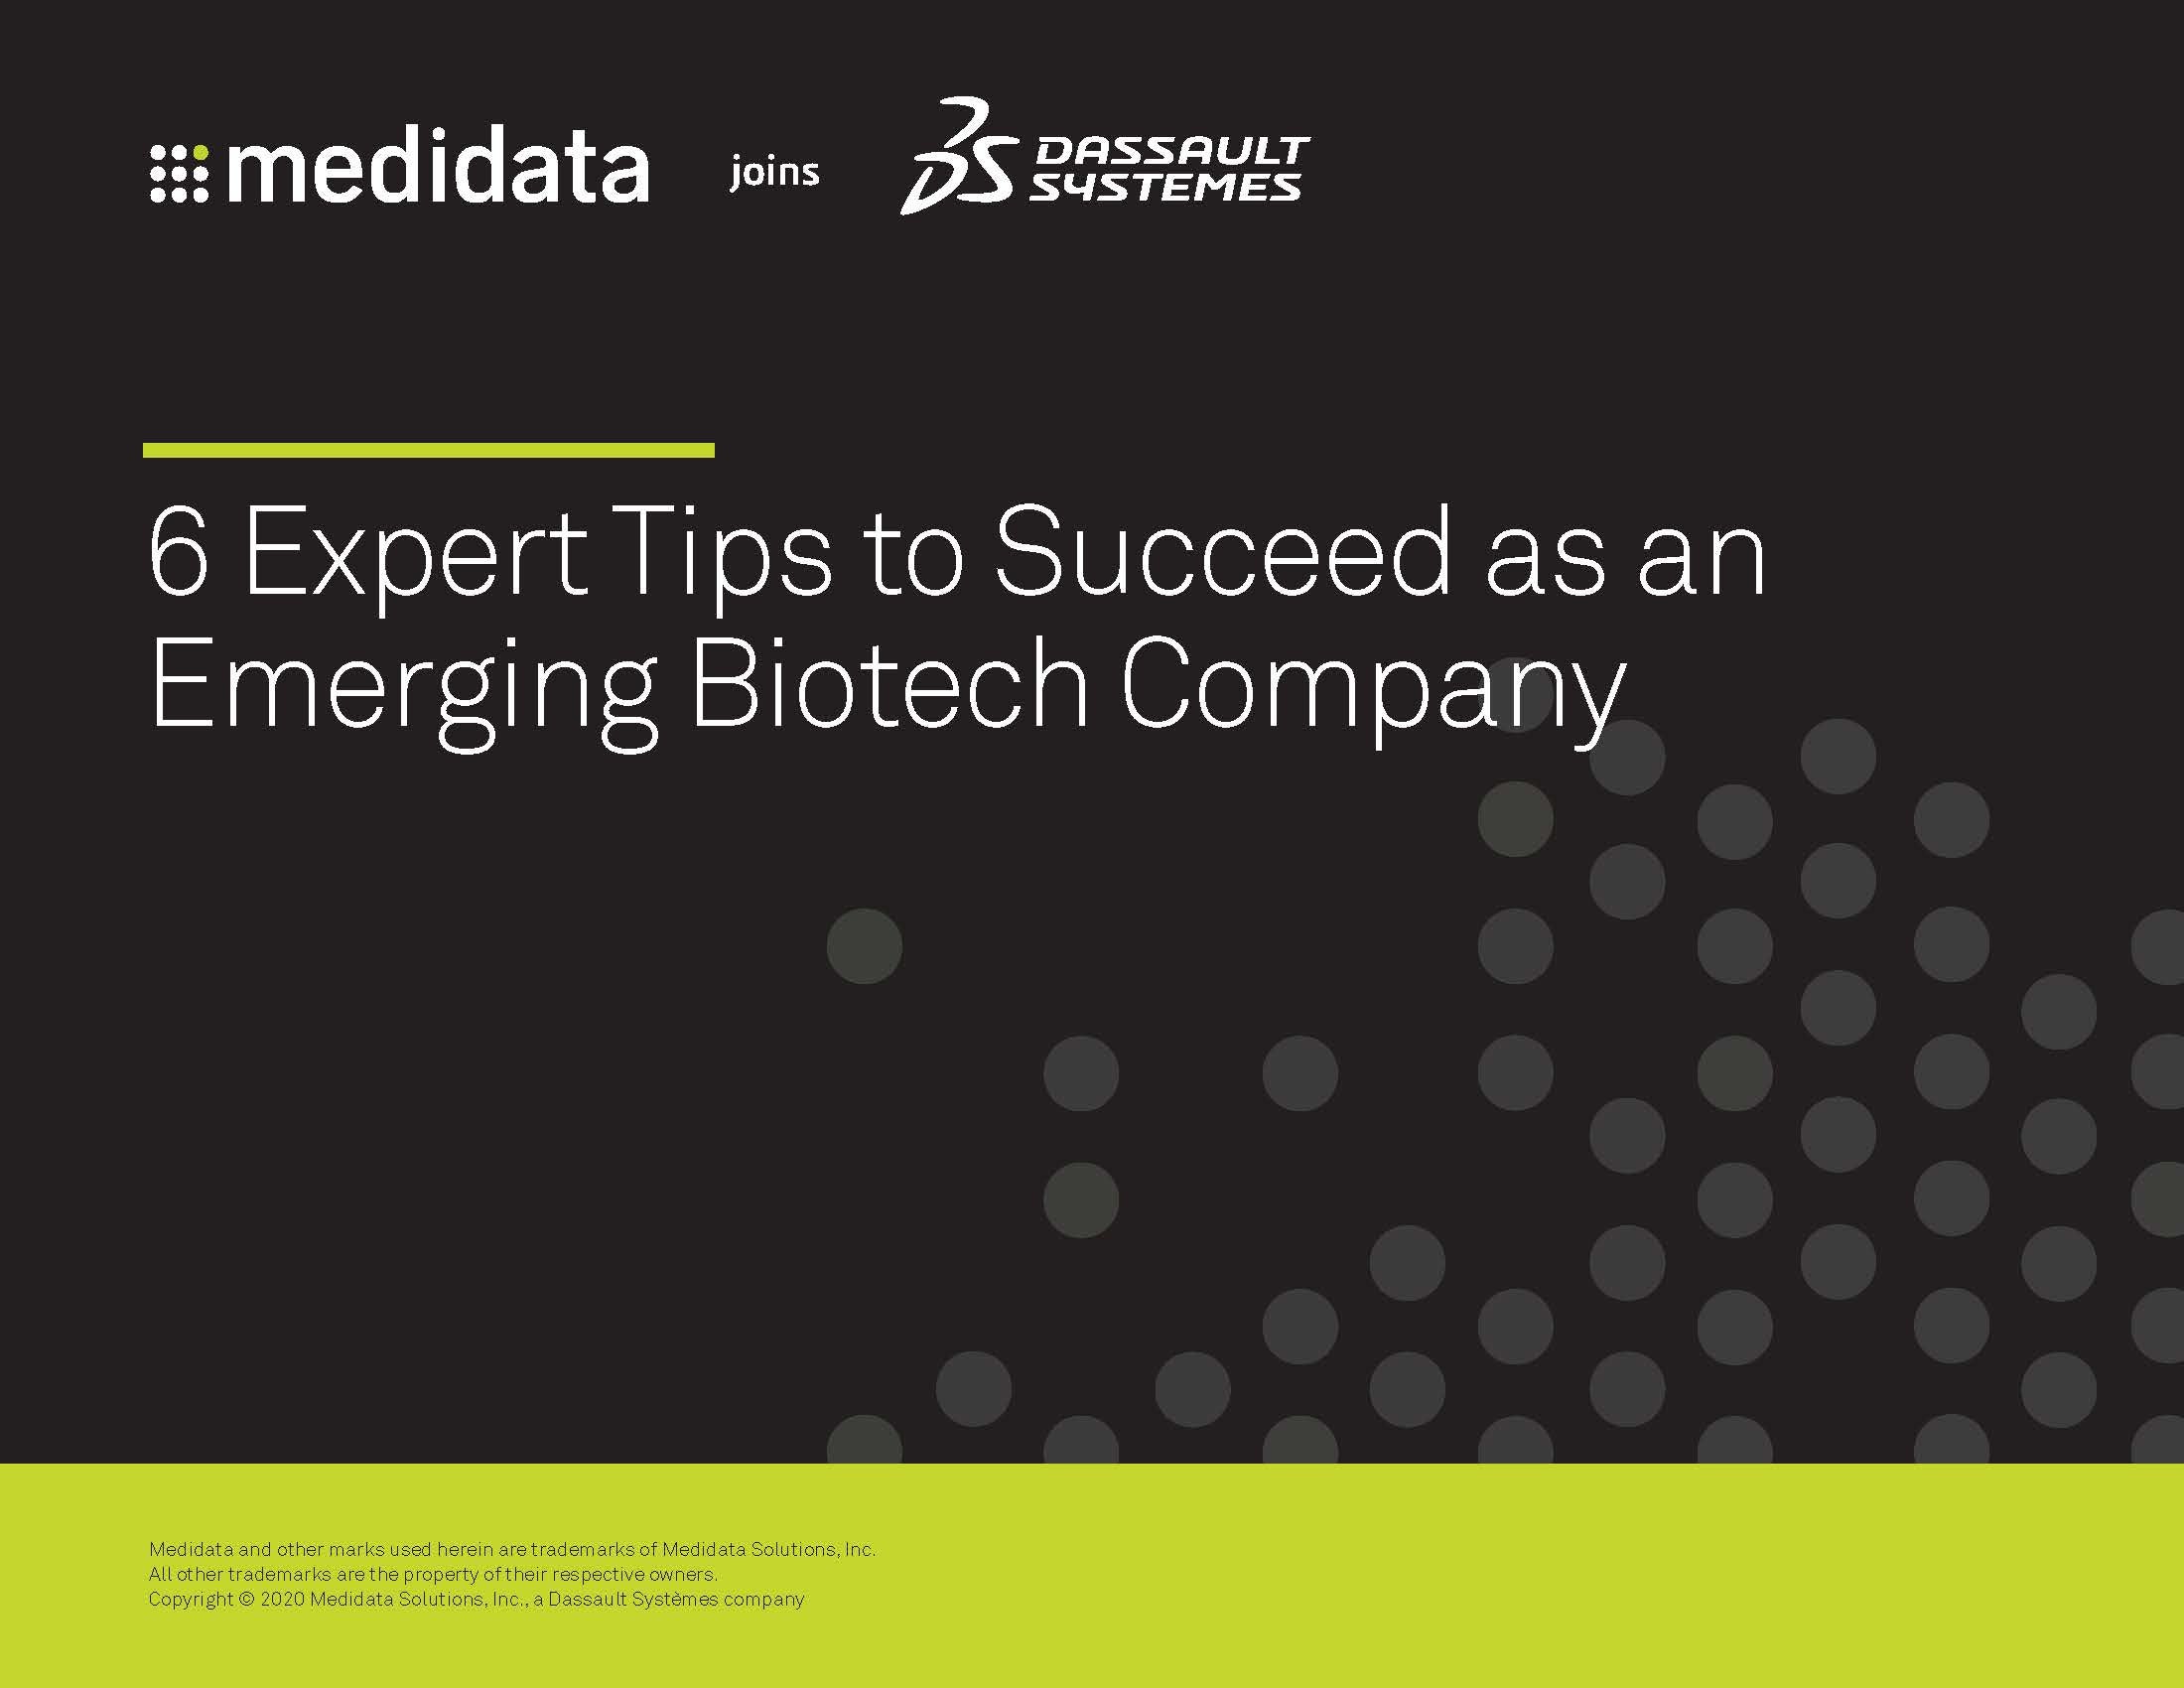 6 Expert Tips to Succeed as an Emerging Biotech Company